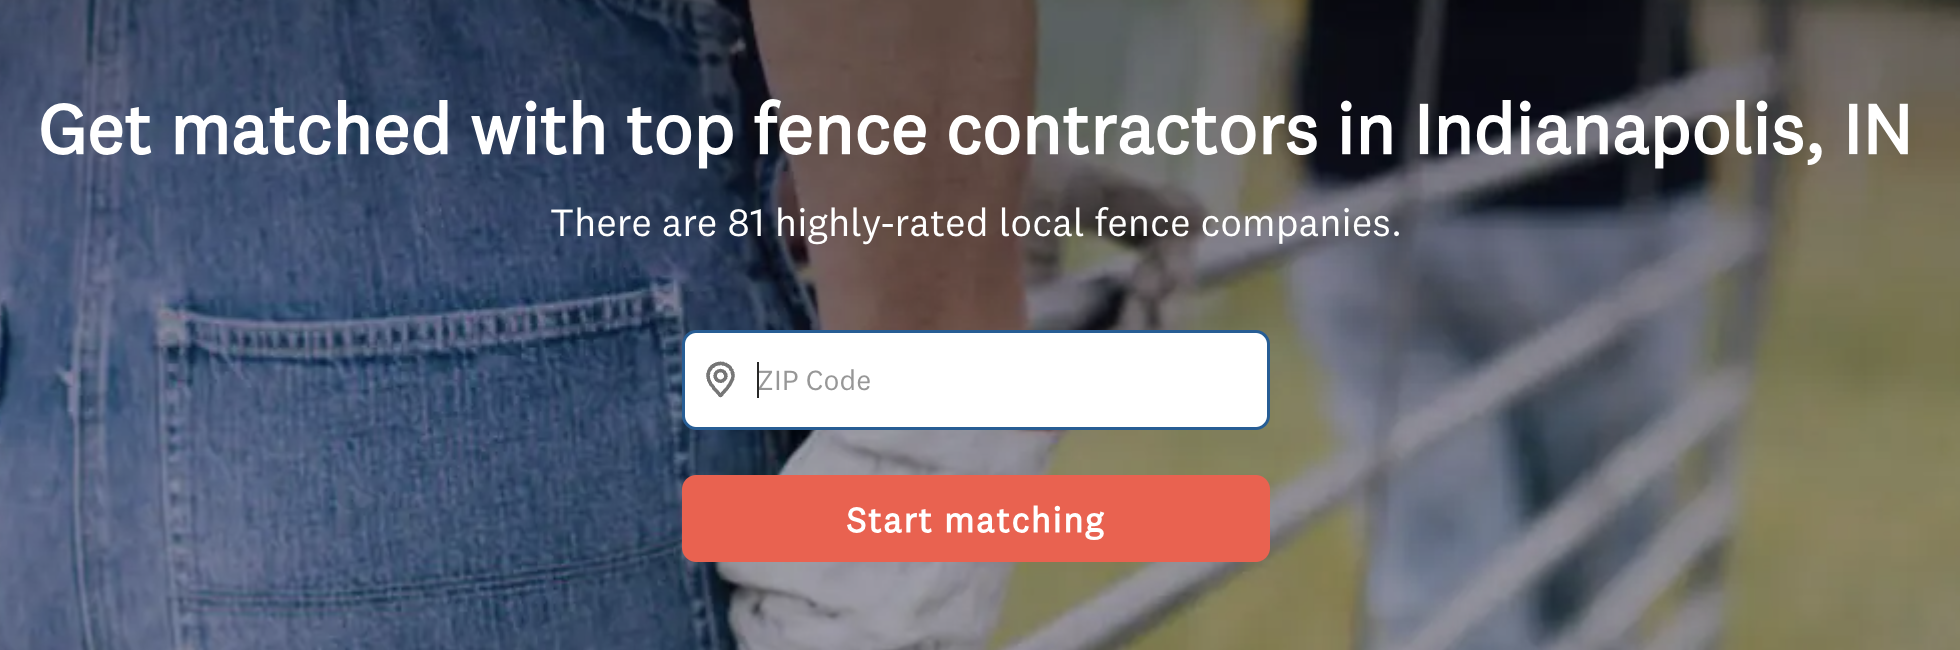 Page element showing an image of blue jeans on a fence contractor search page